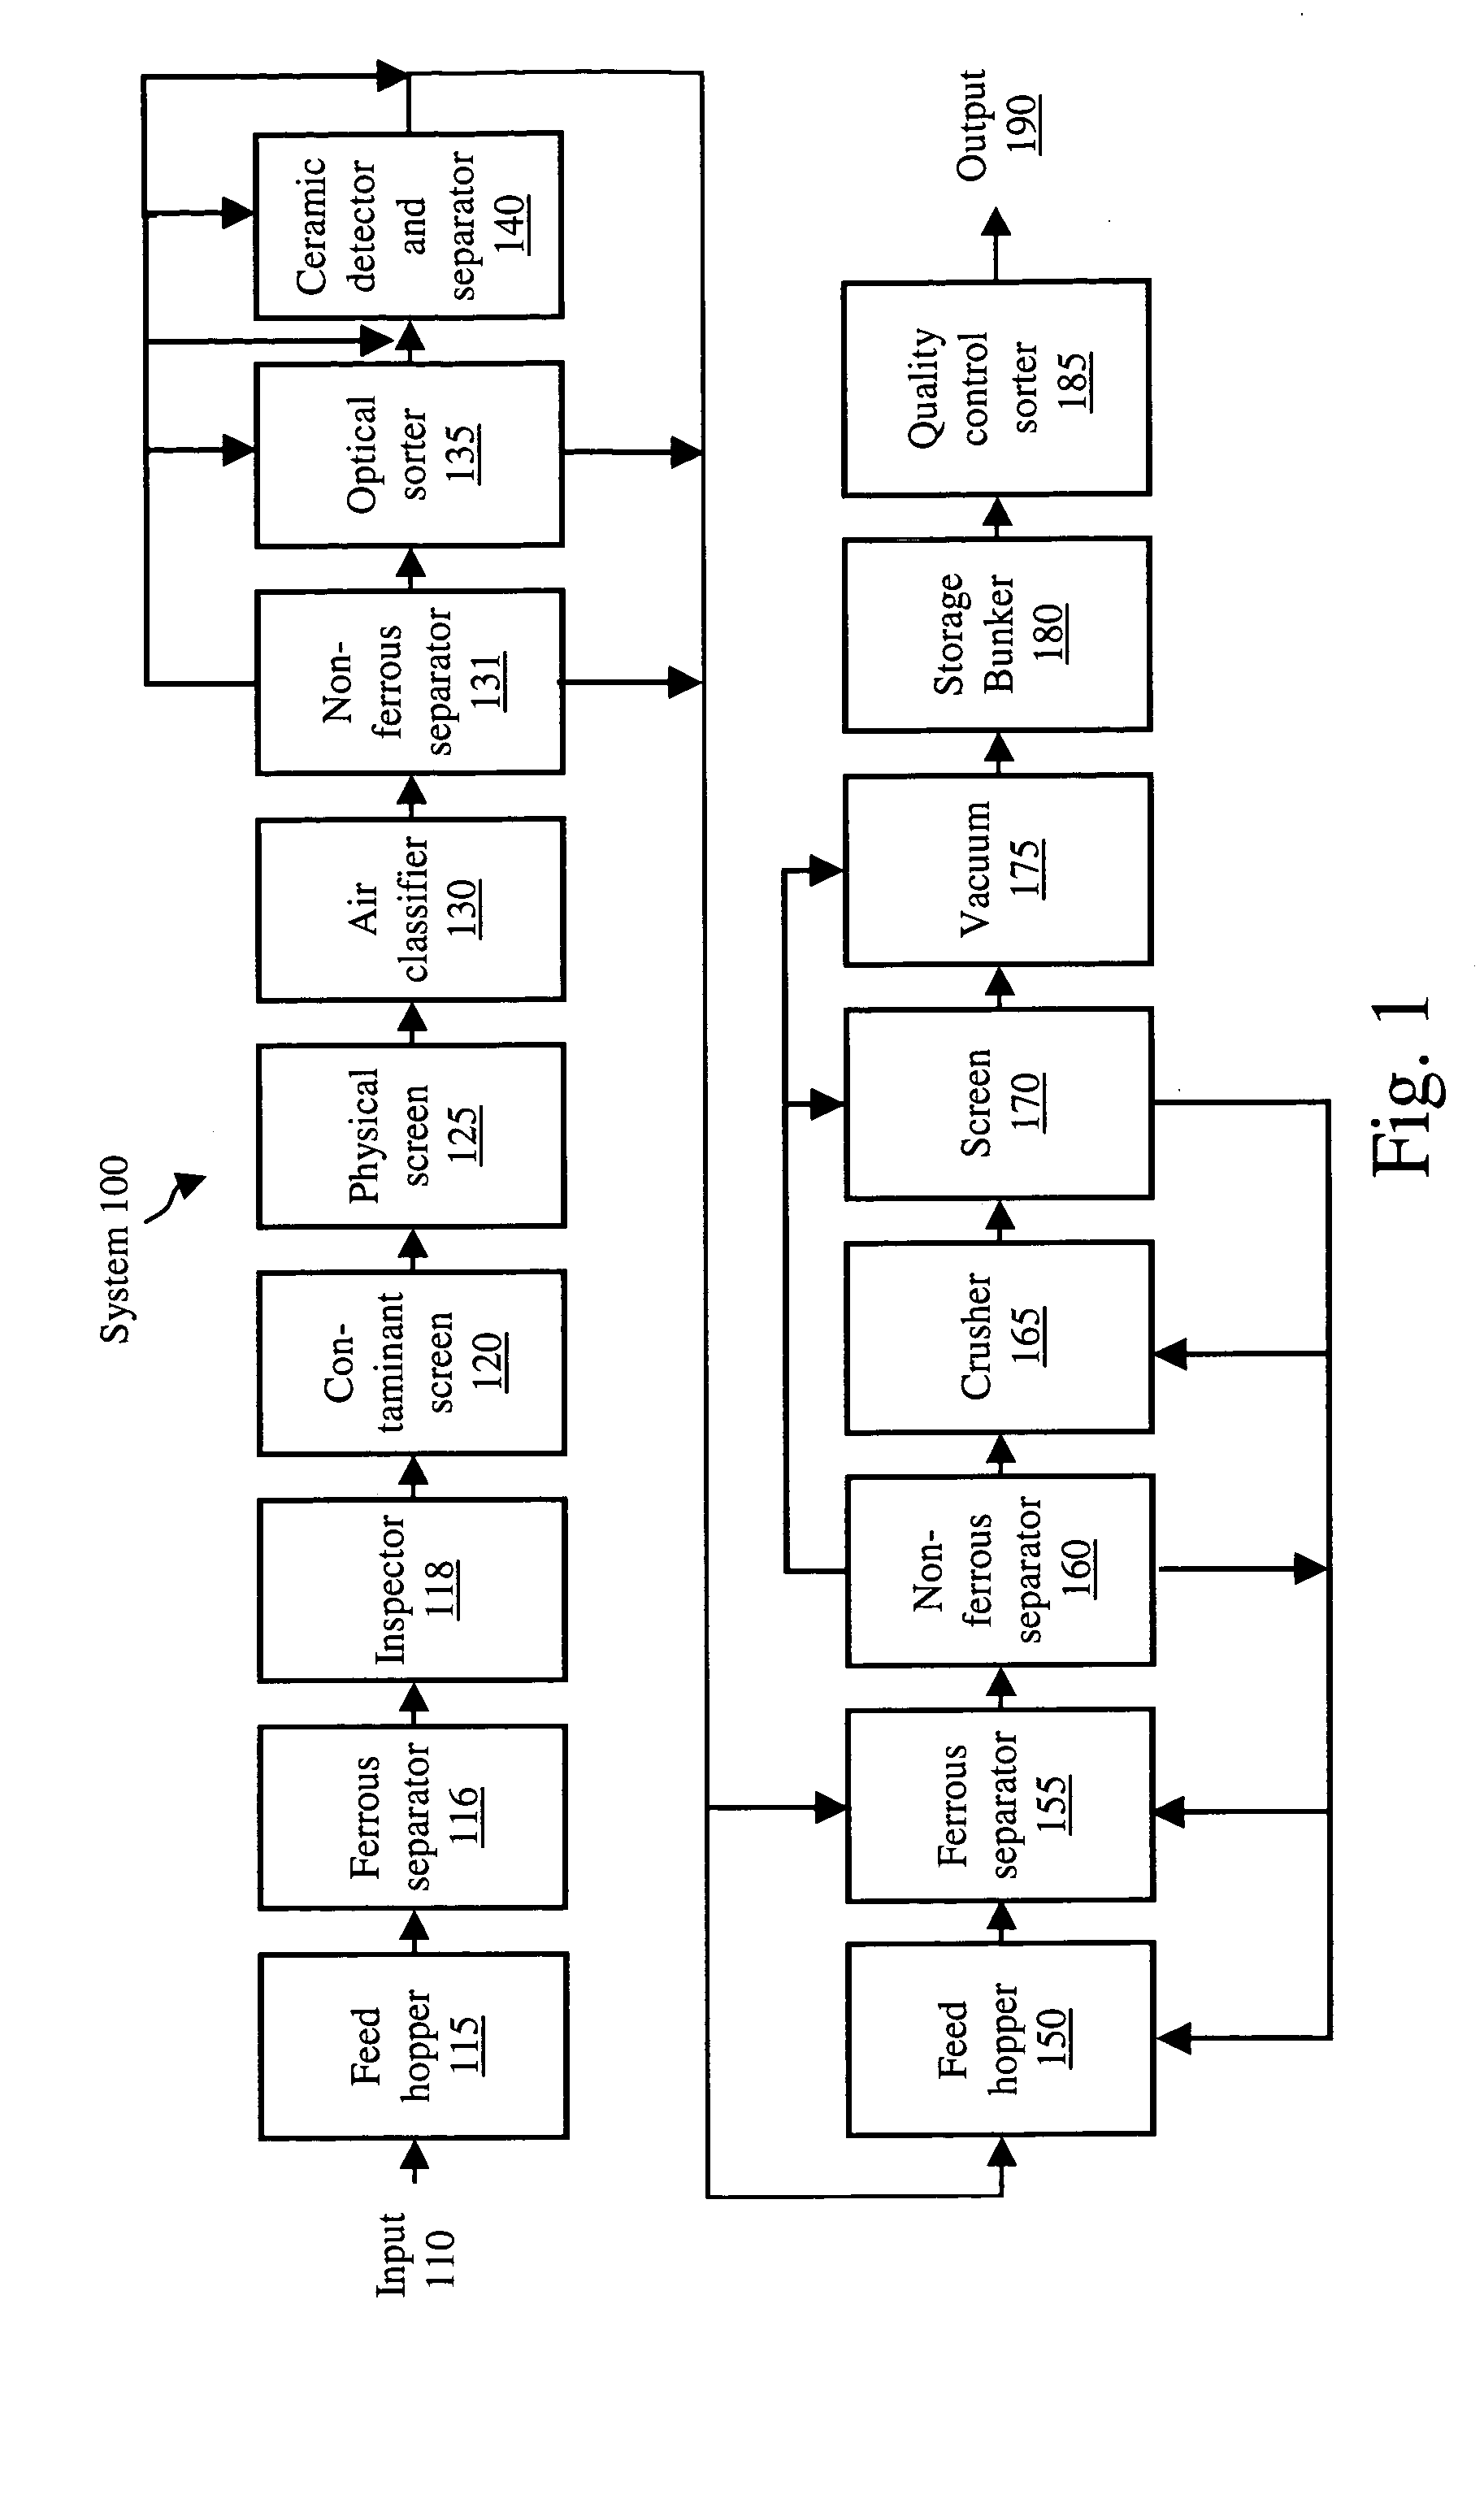 Systems and methods for glass recycling at a beneficiator